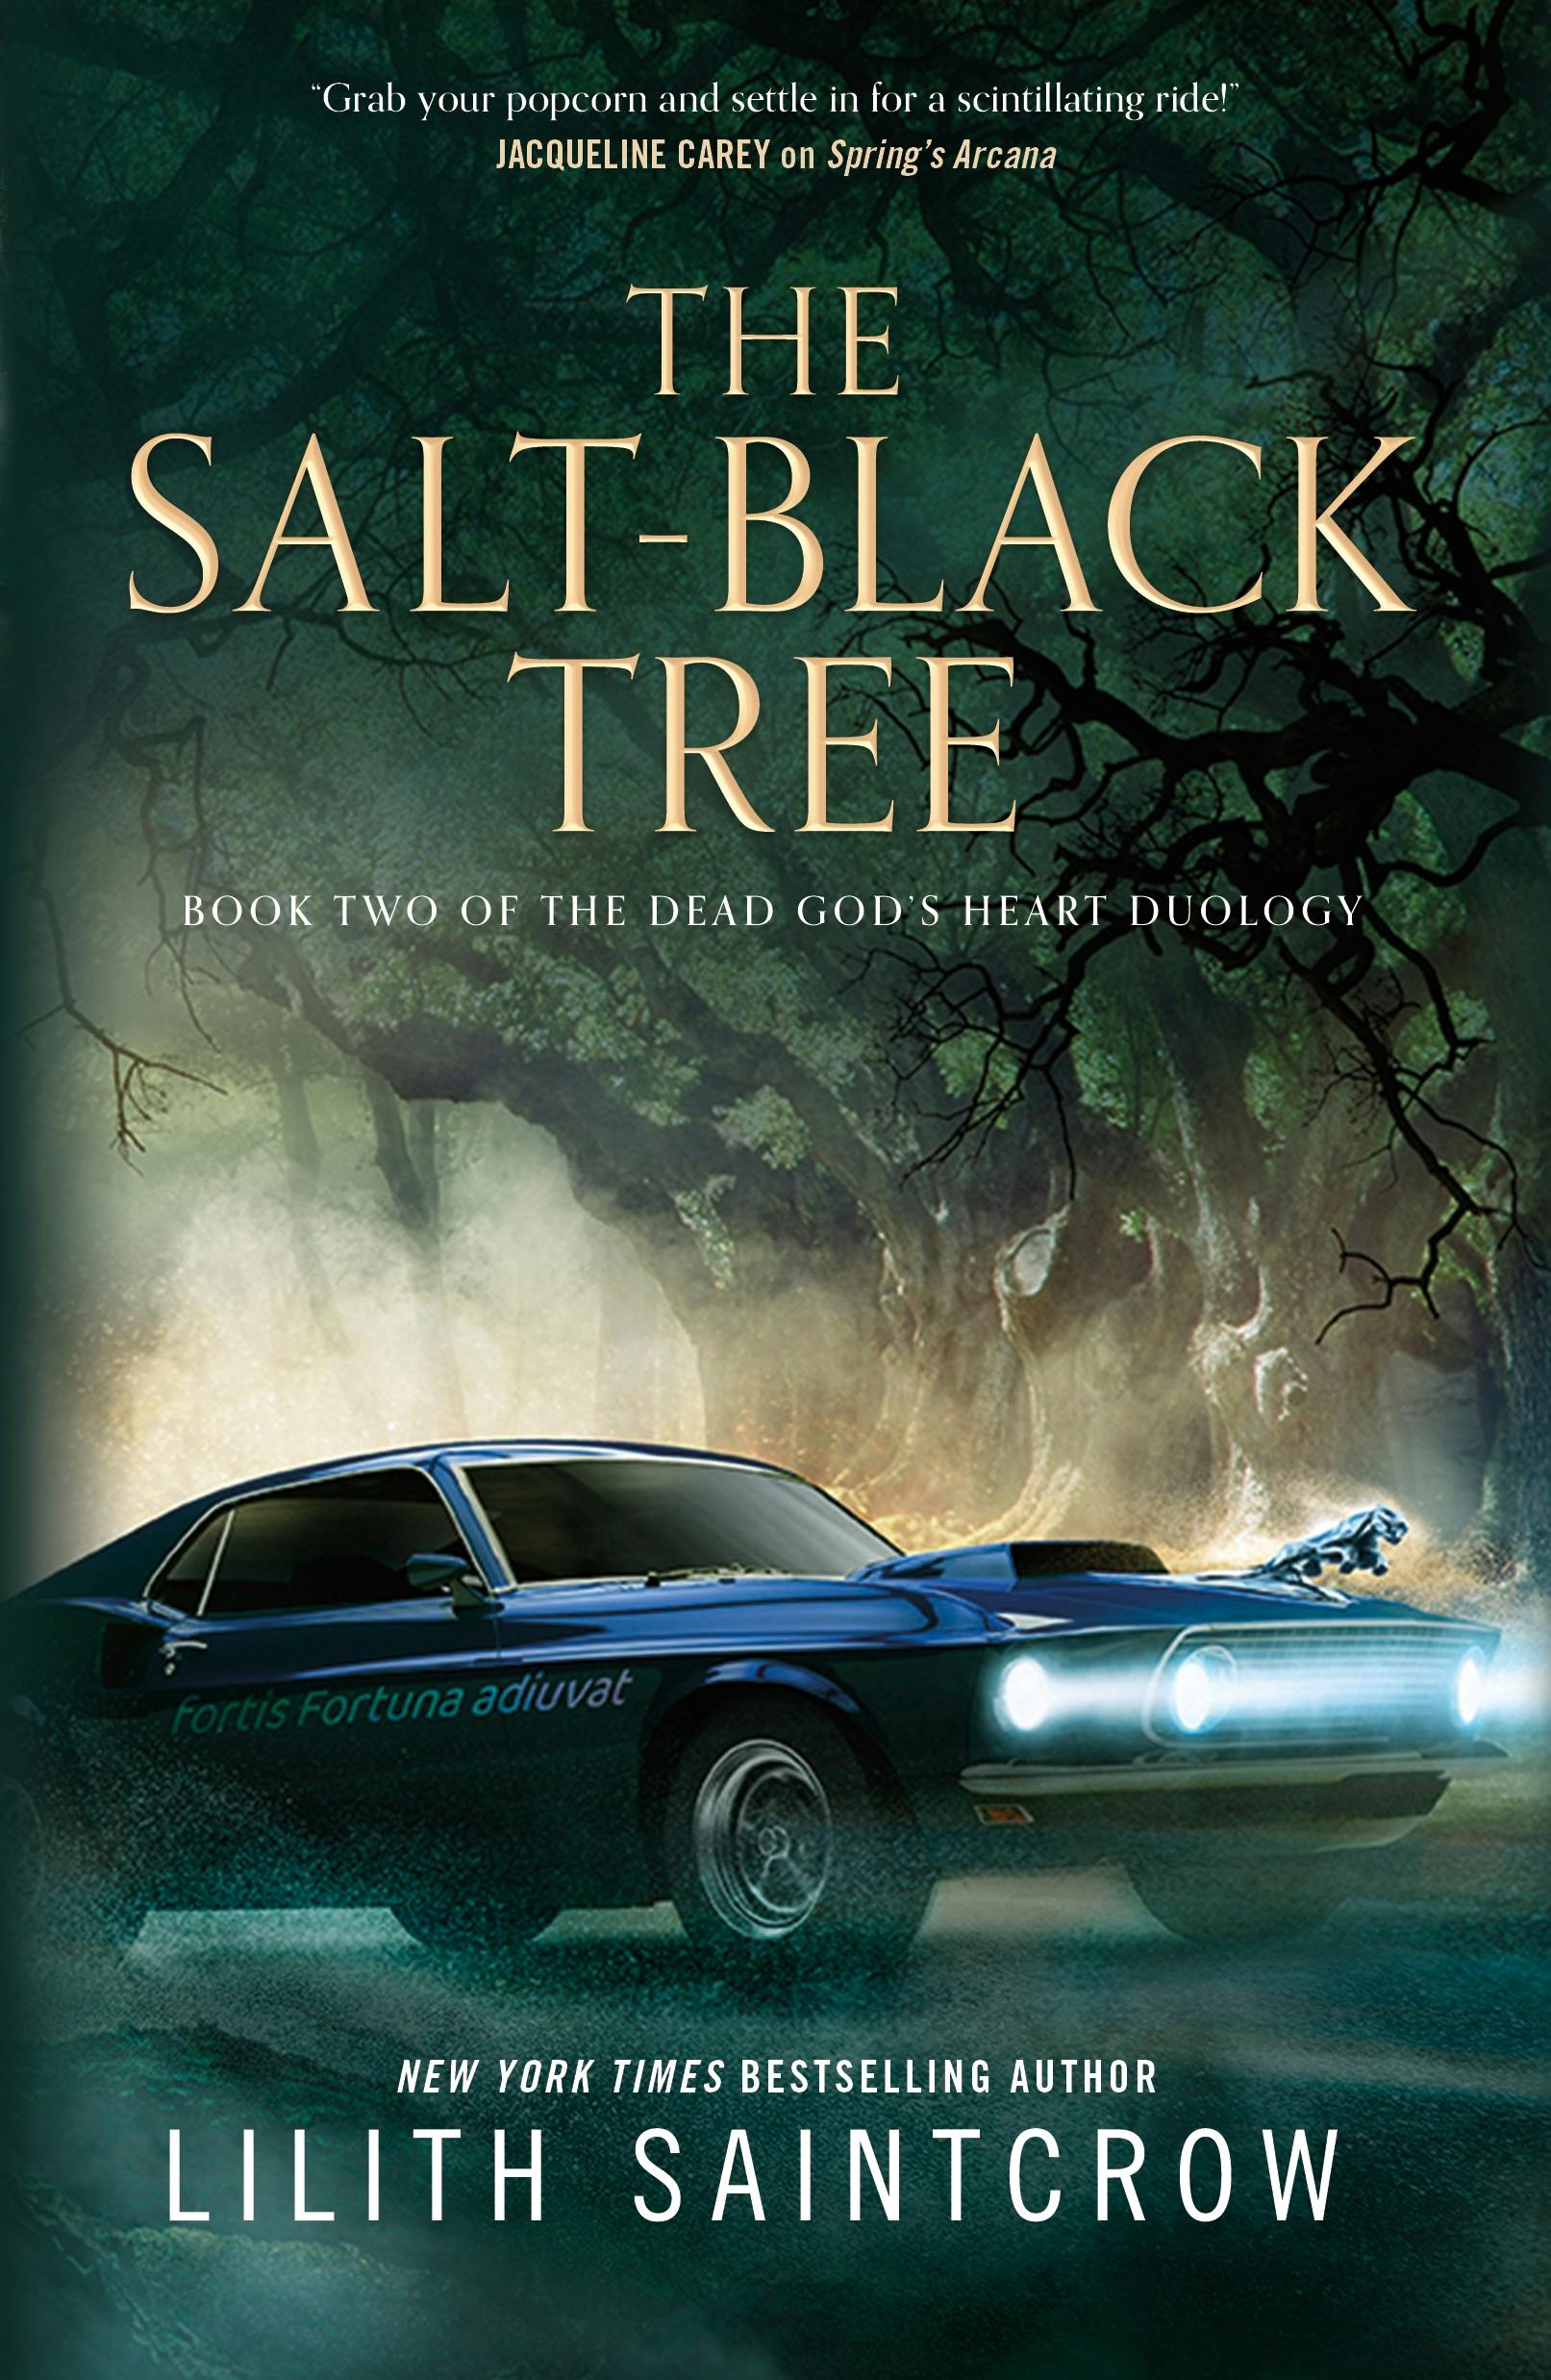 Cover for the book titled as: The Salt-Black Tree